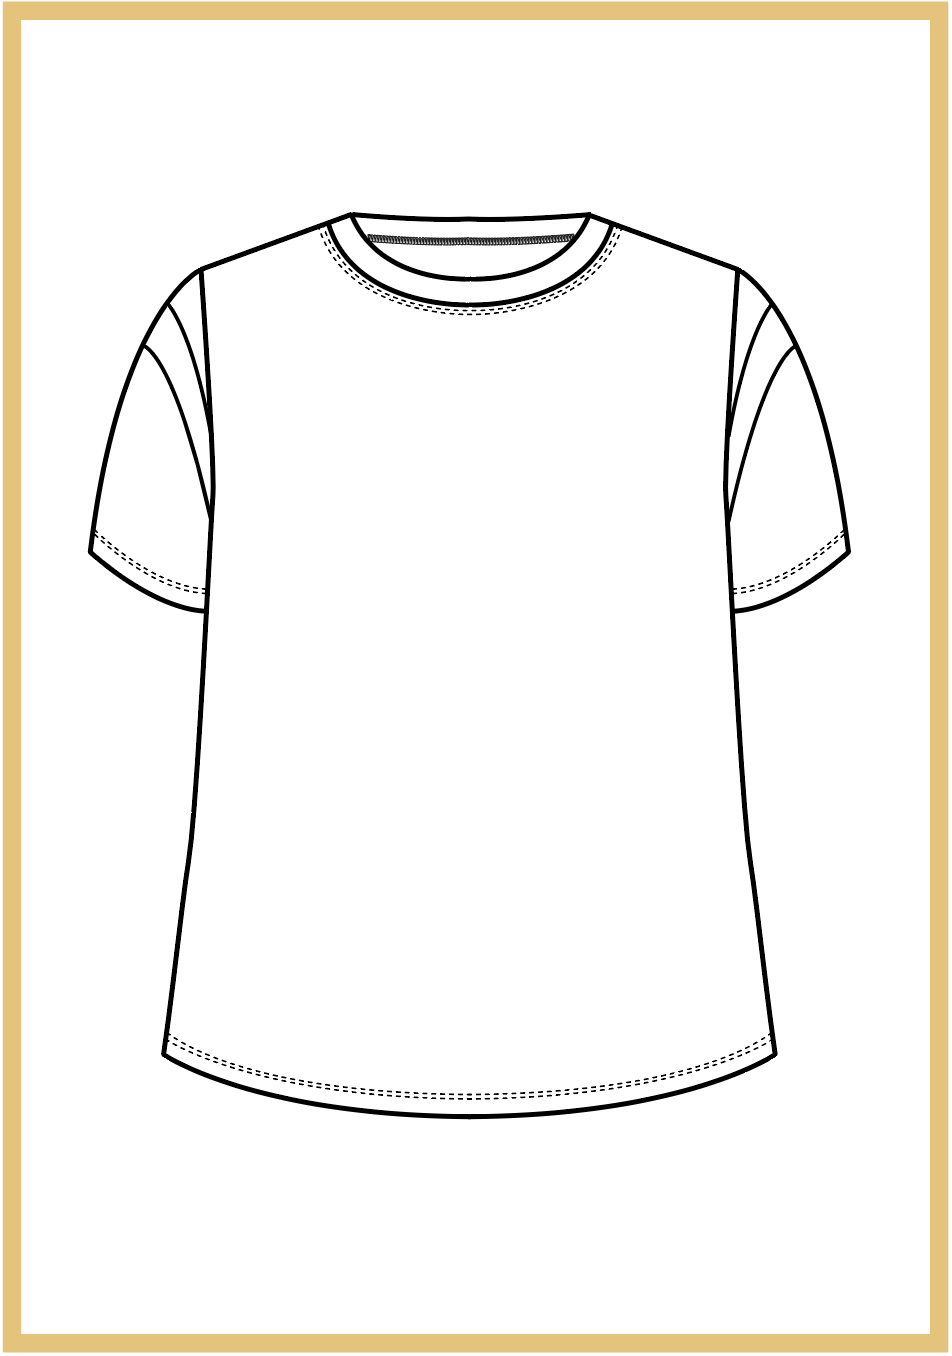 Pattern Hackers: Create a Custom Color-blocked T-shirt